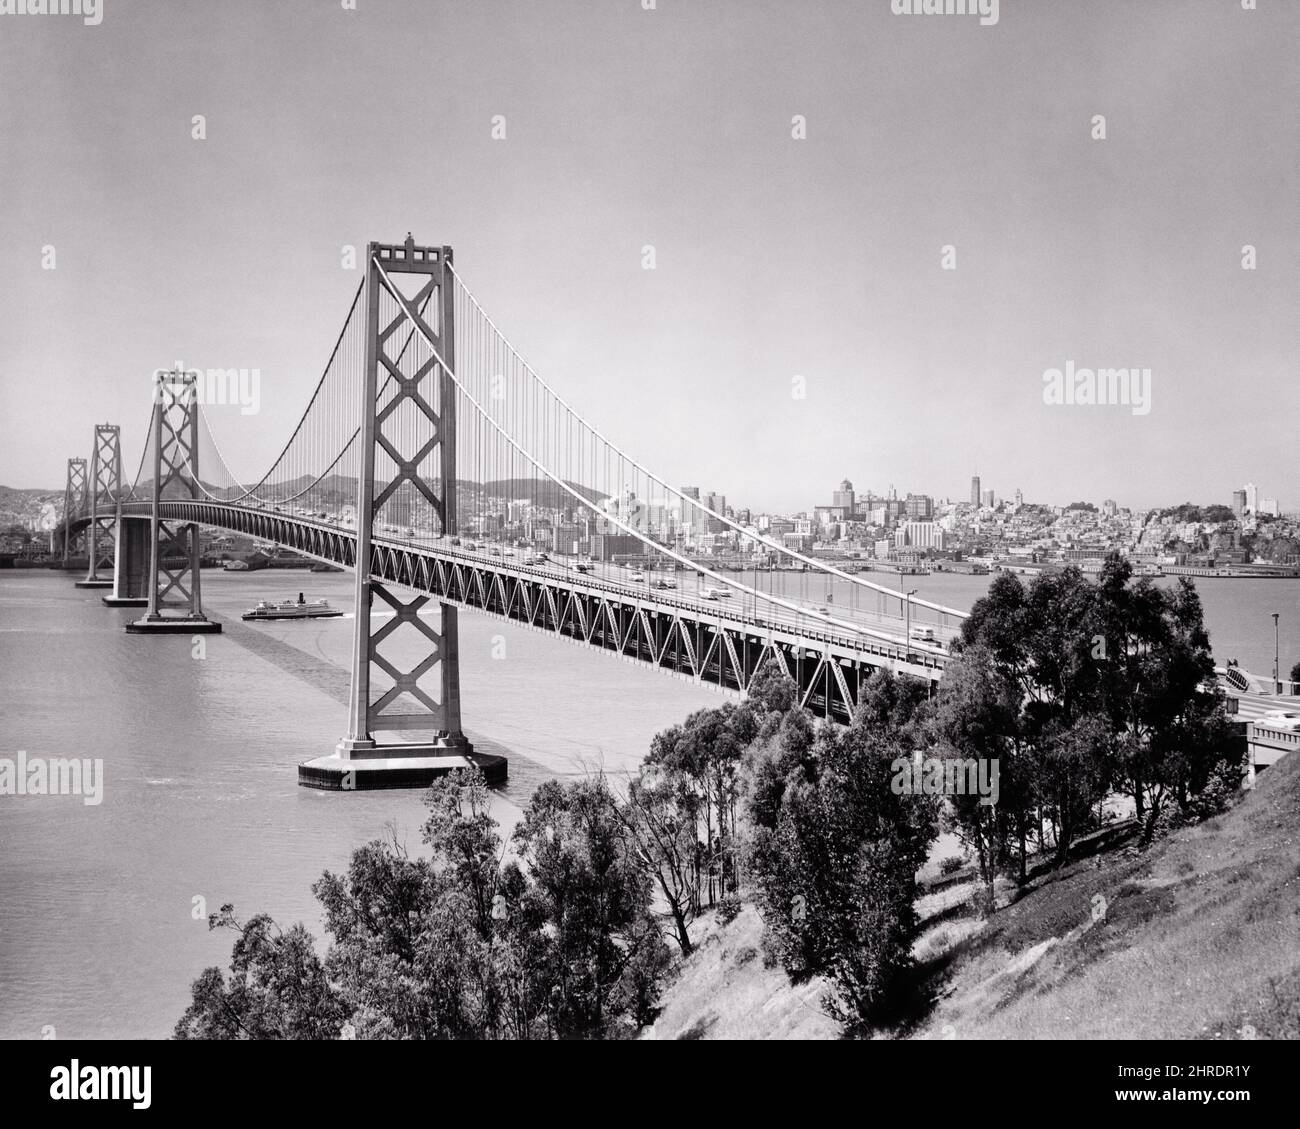 1940s 1950s WESTERN SPAN OF THE OAKLAND BAY BRIDGE LOOKING TOWARDS SF AS SEEN FROM YERBA BUENA ISLAND SAN FRANCISCO CA USA - b4827 HAR001 HARS CONCEPTUAL 1936 CITIES OAKLAND BUENA OAKLAND BAY BRIDGE SAN FRANCISCO BUILT SPAN BLACK AND WHITE BRIDGES CABLE DESIGNED HAR001 OLD FASHIONED SUSPENSION Stock Photo